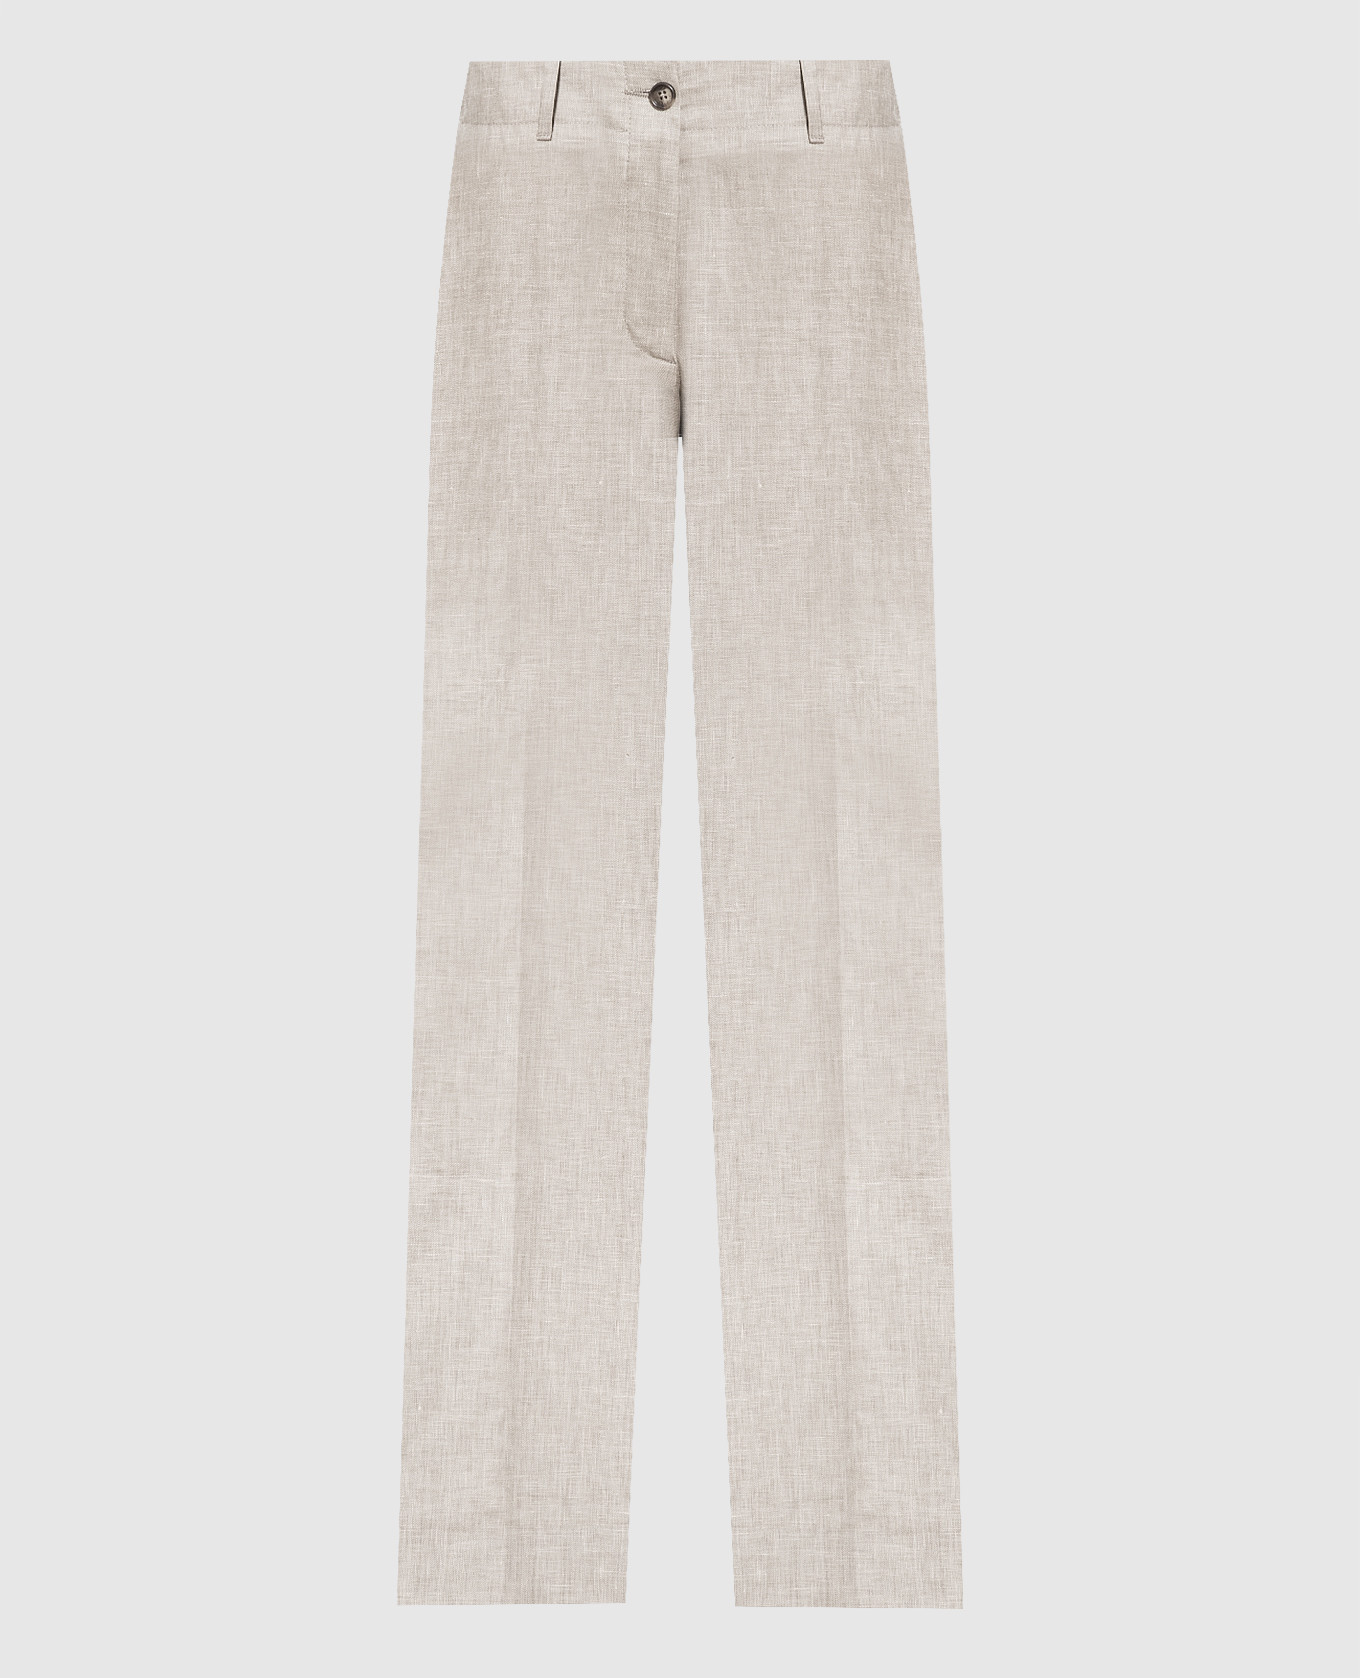 Gray trousers made of linen, wool and silk